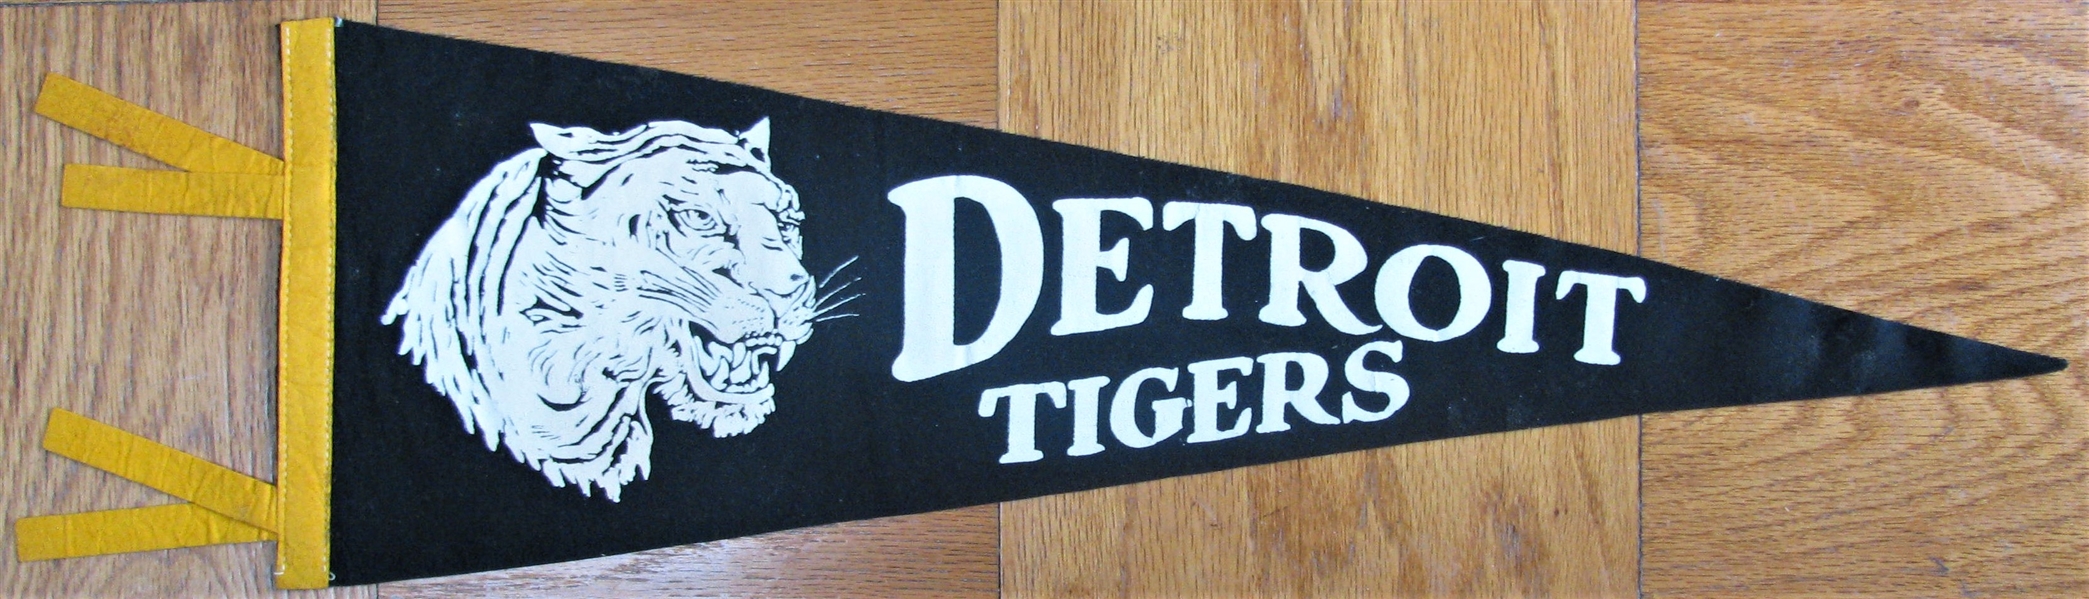 40's DETROIT TIGERS PENNANT